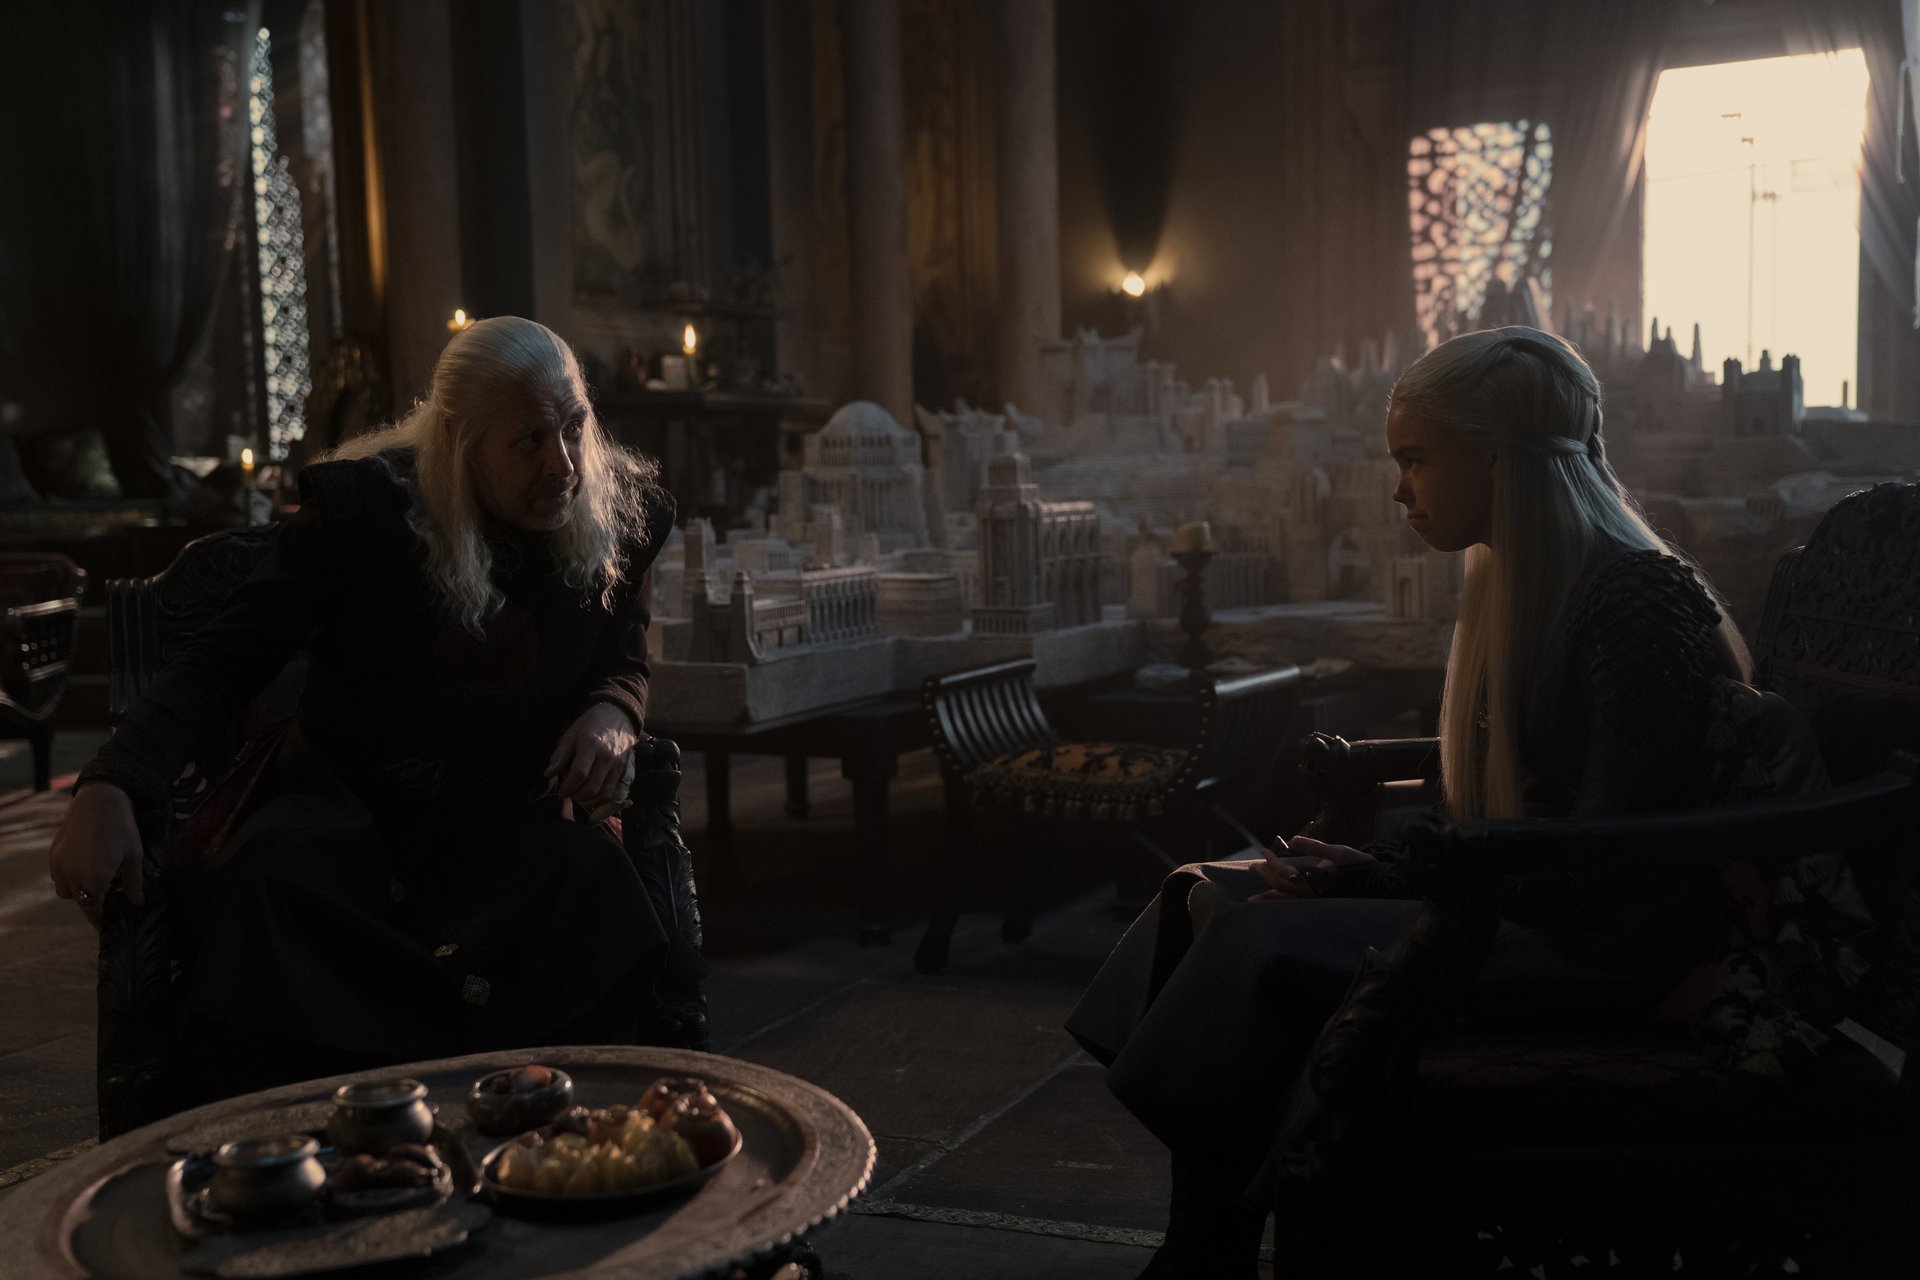 Paddy Considine as Viserys and Milly Alcock as Rhaenyra in House of the Dragon